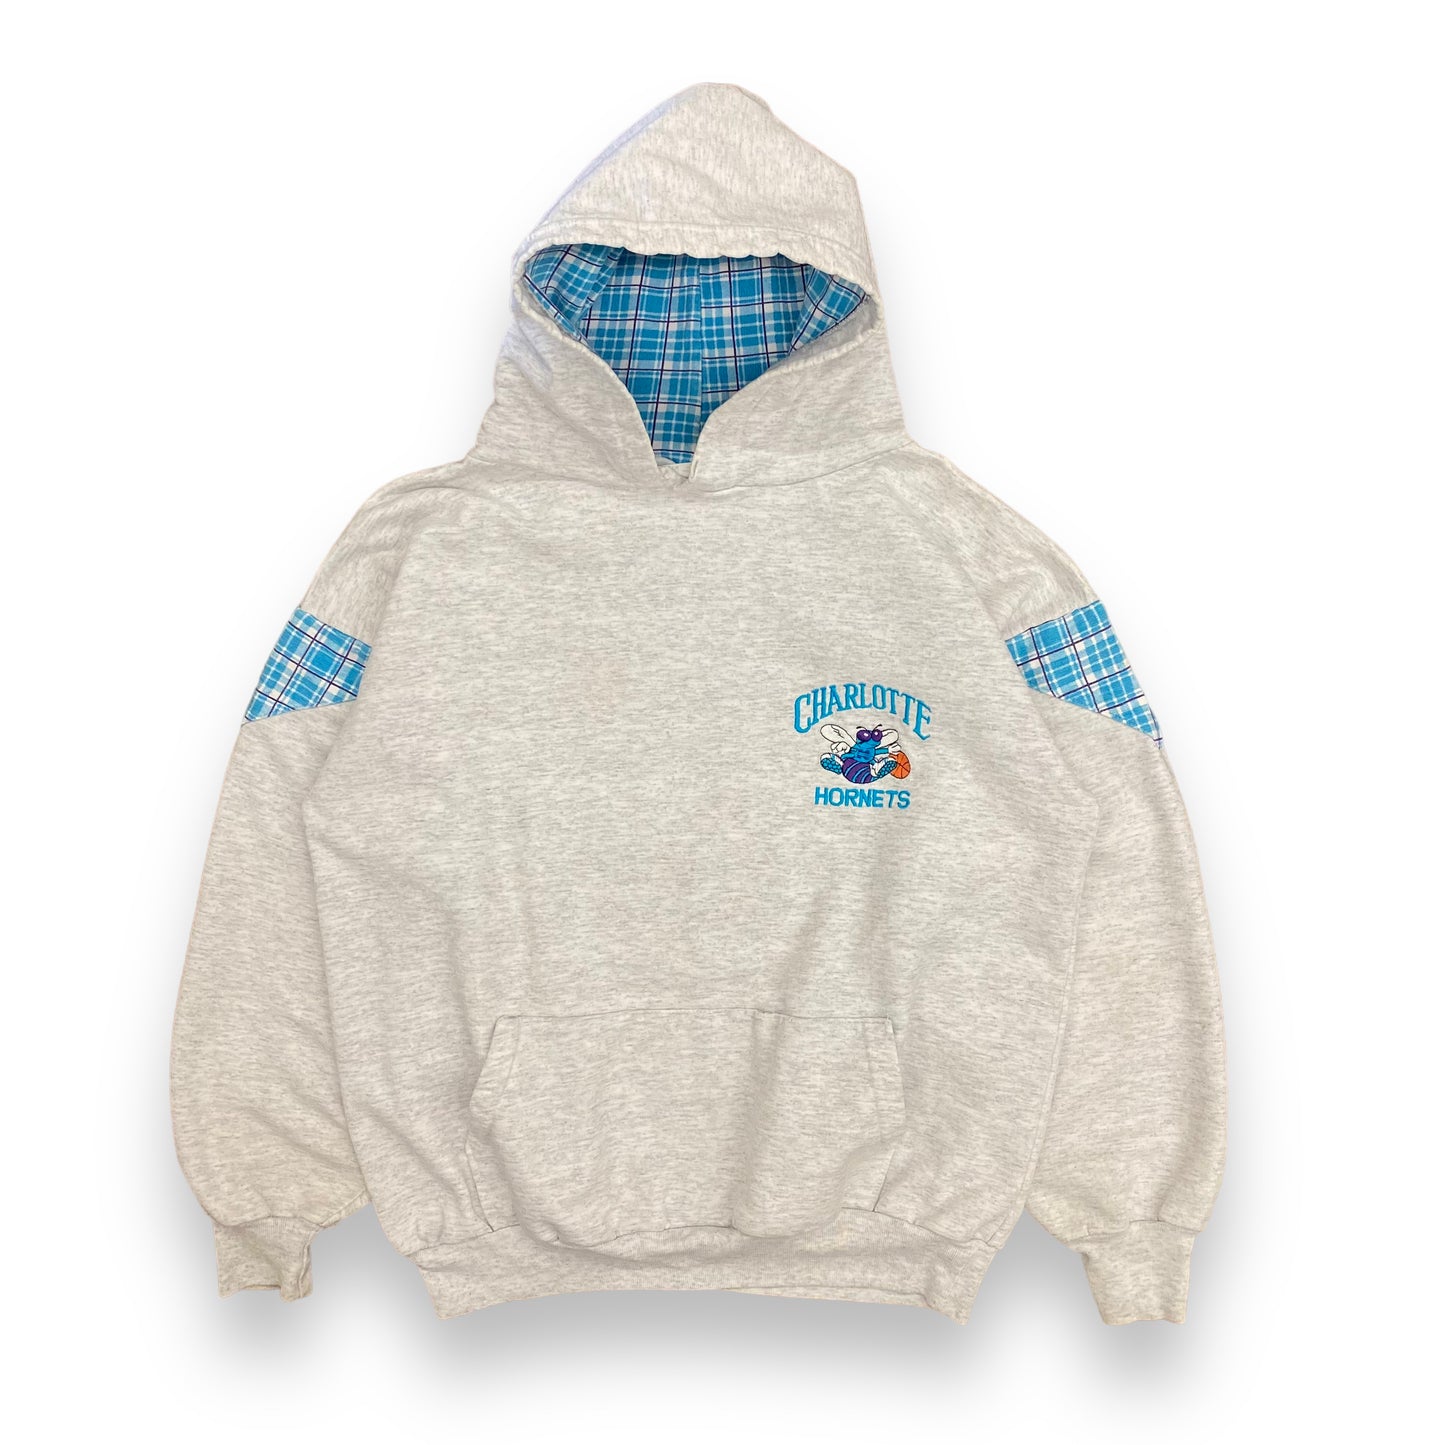 1990s Charlotte Hornets Embroidered Plaid Hoodie - Size Large